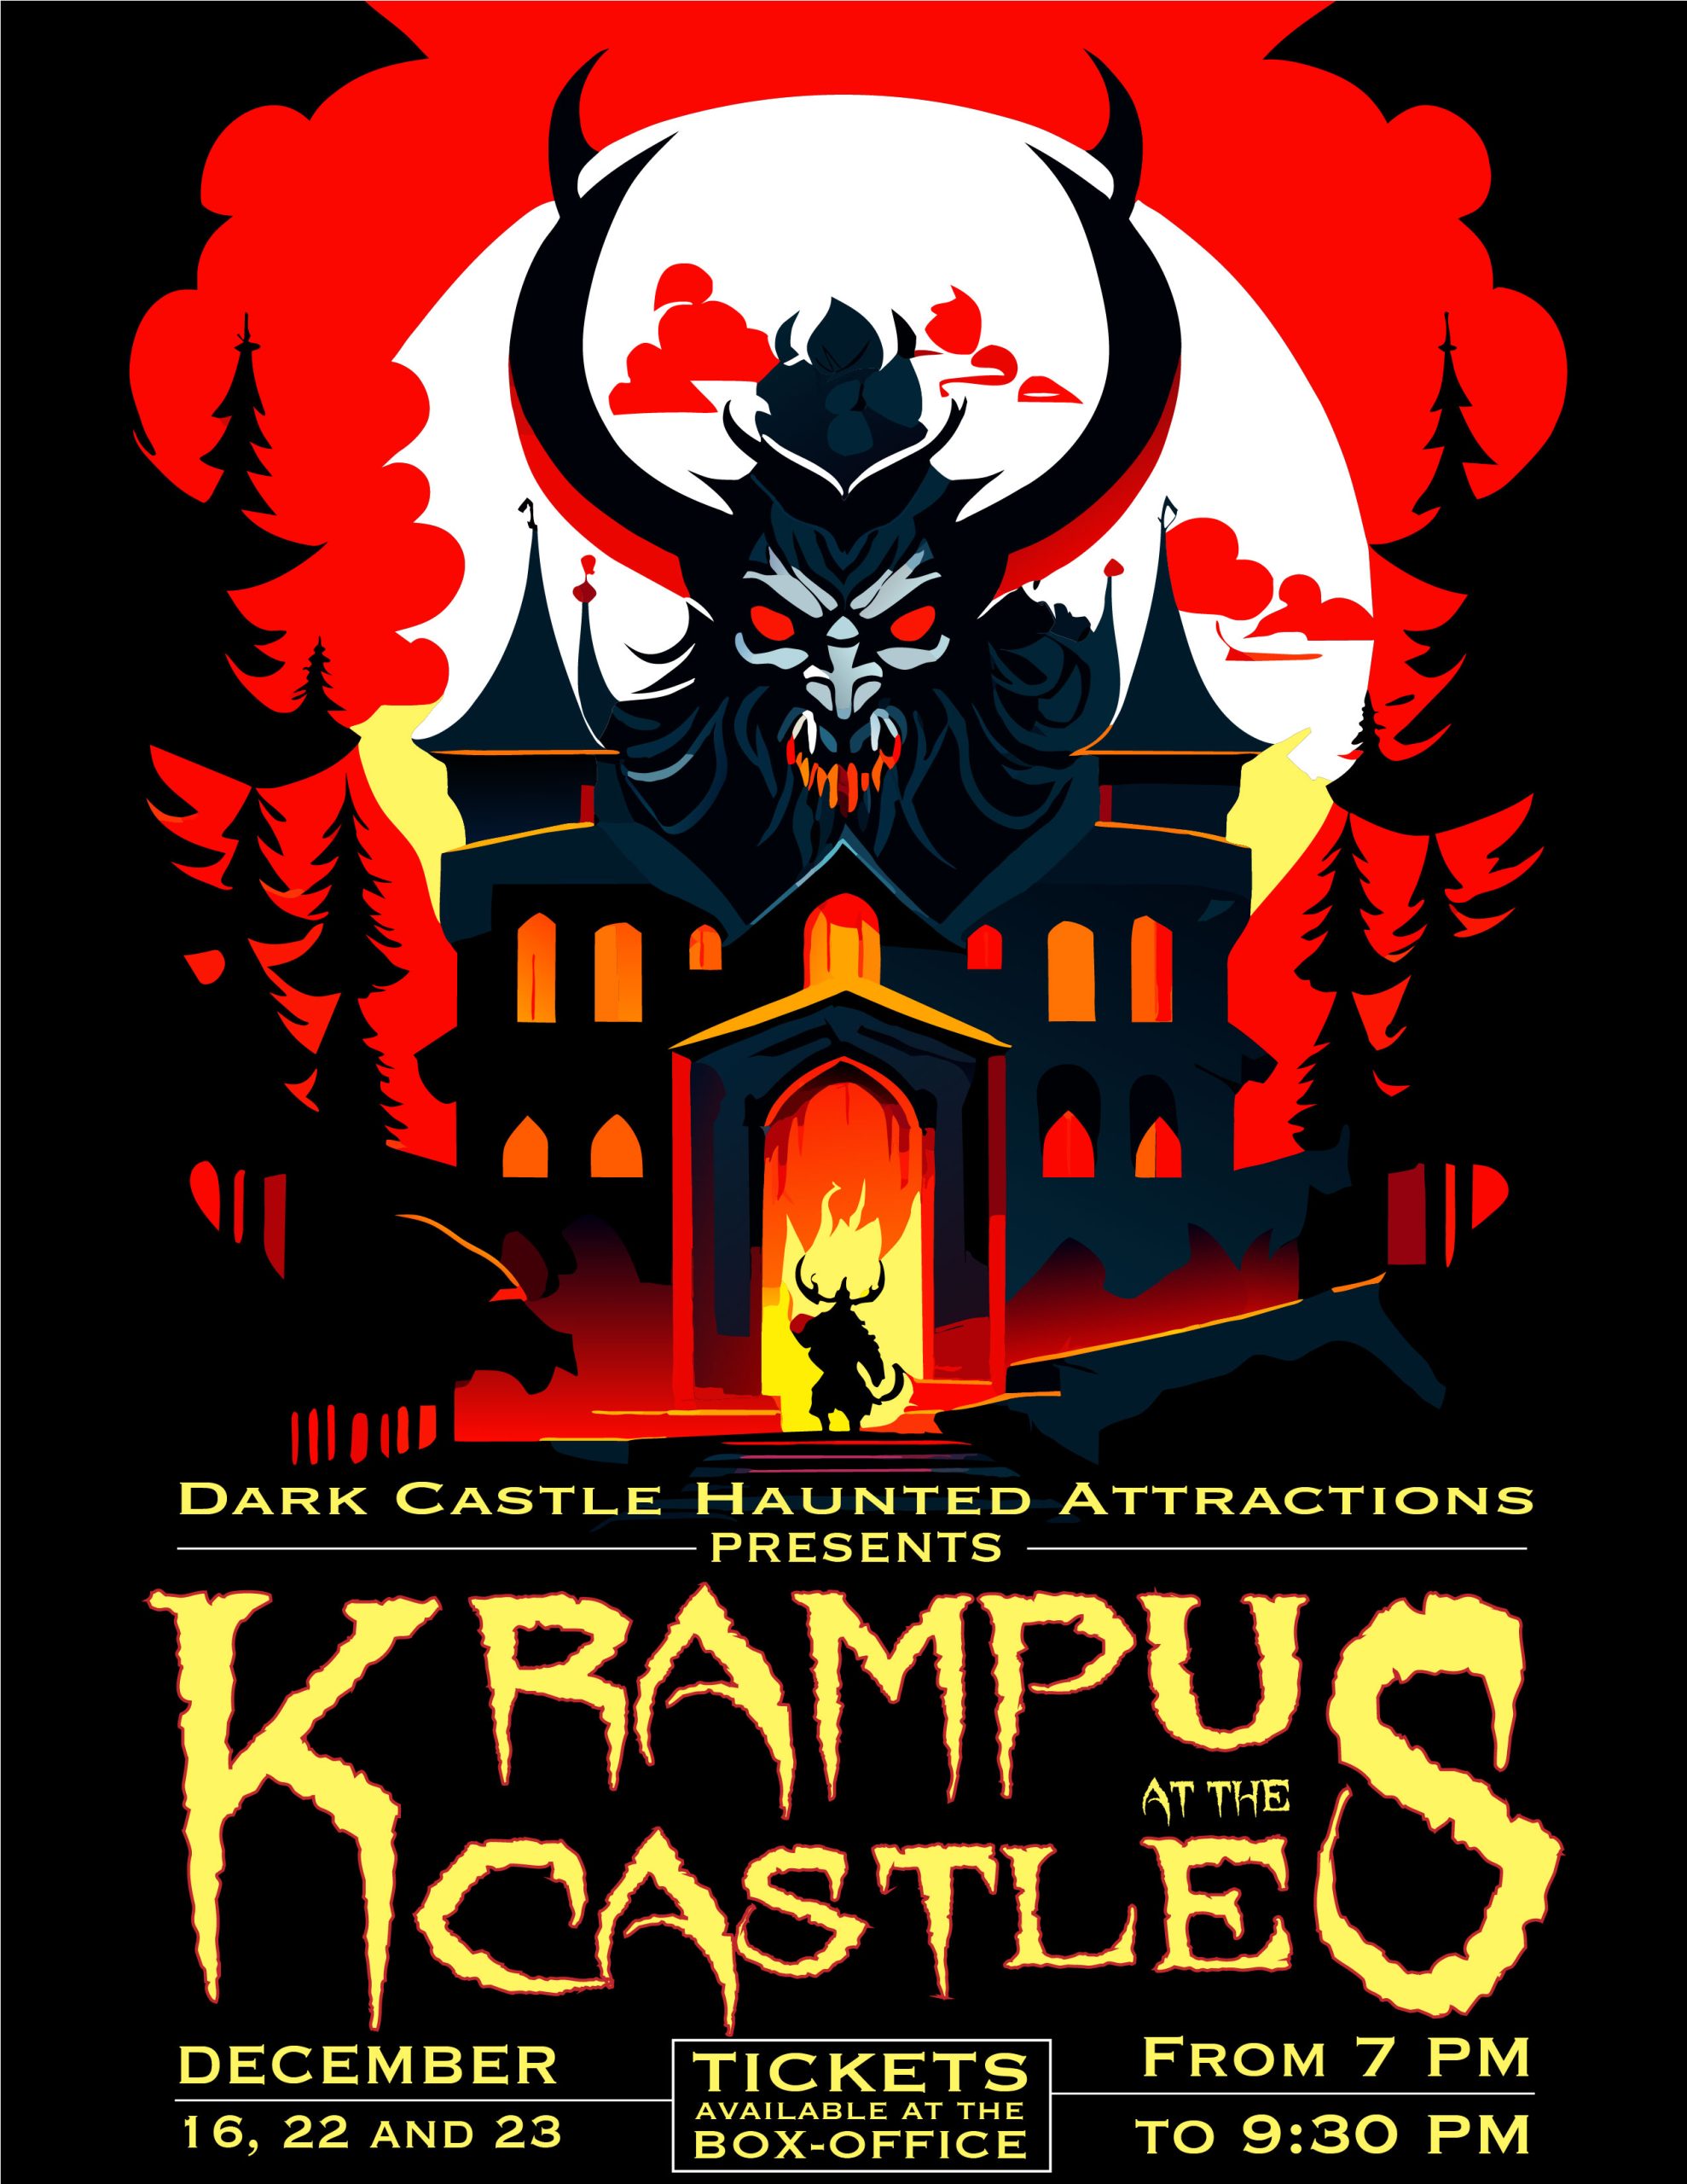 Krampus at the Castle. A spooky holiday celebration.